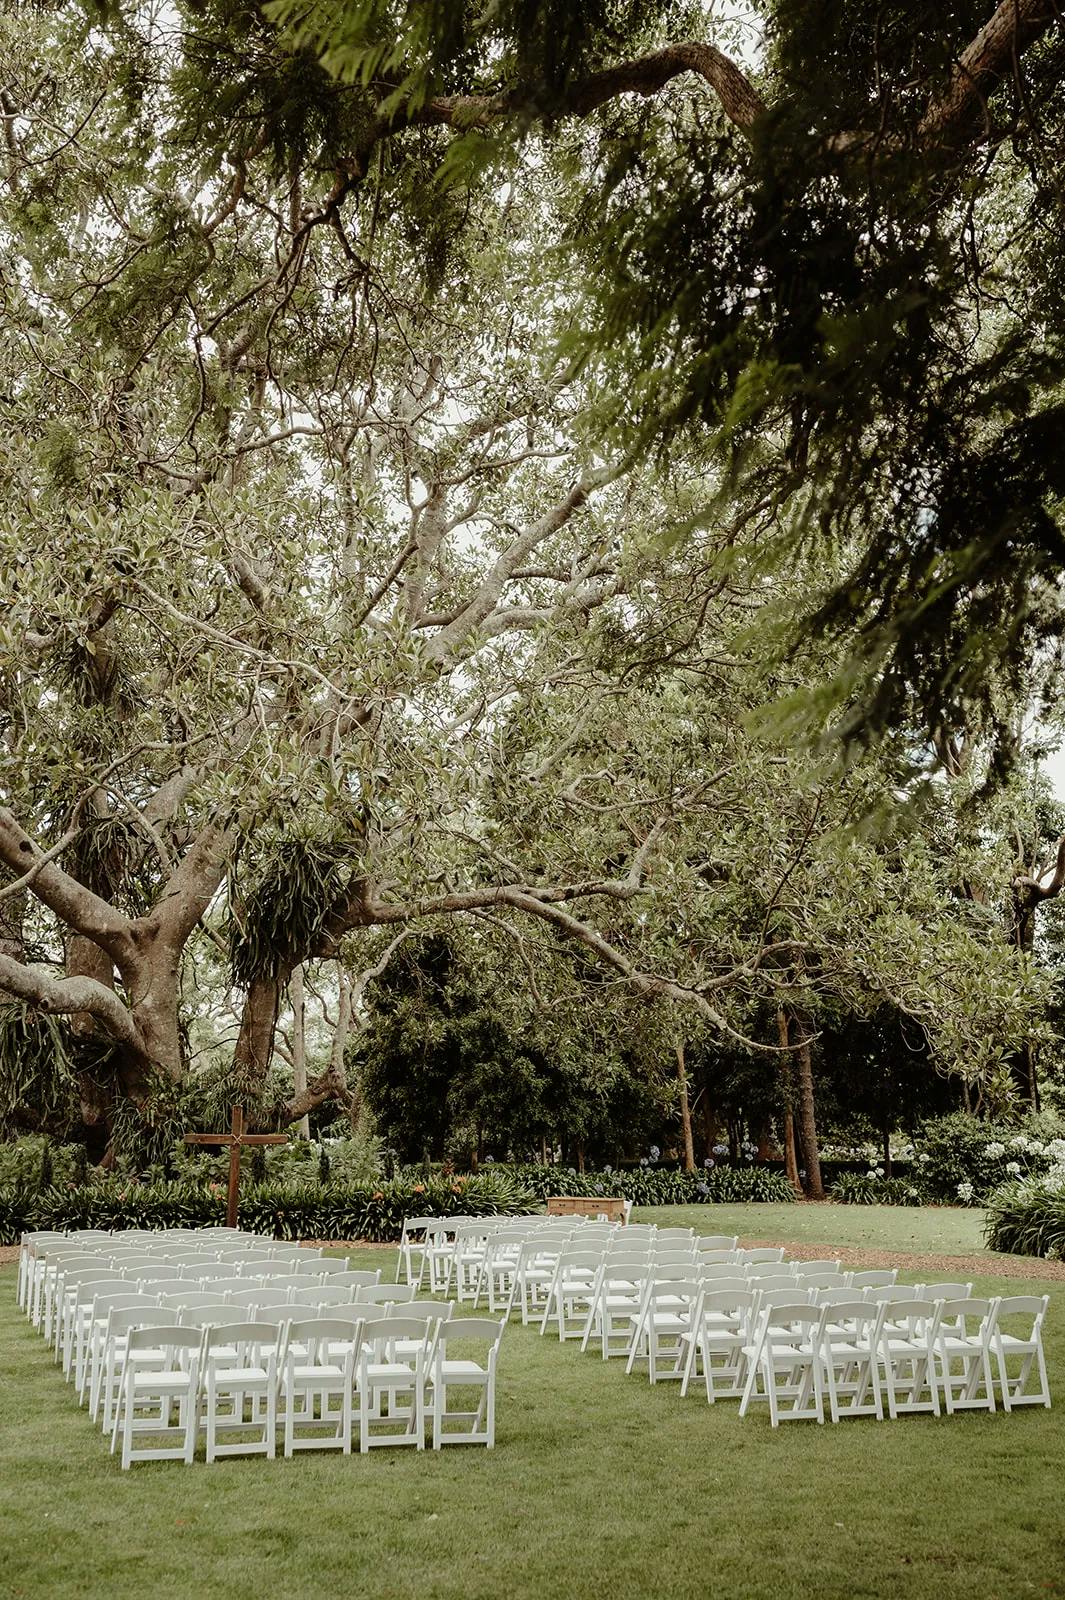 An outdoor wedding setup featuring rows of white chairs arranged in a neatly organized rectangular formation on a lush green lawn. The area is surrounded by large, leafy trees creating a serene and picturesque backdrop.